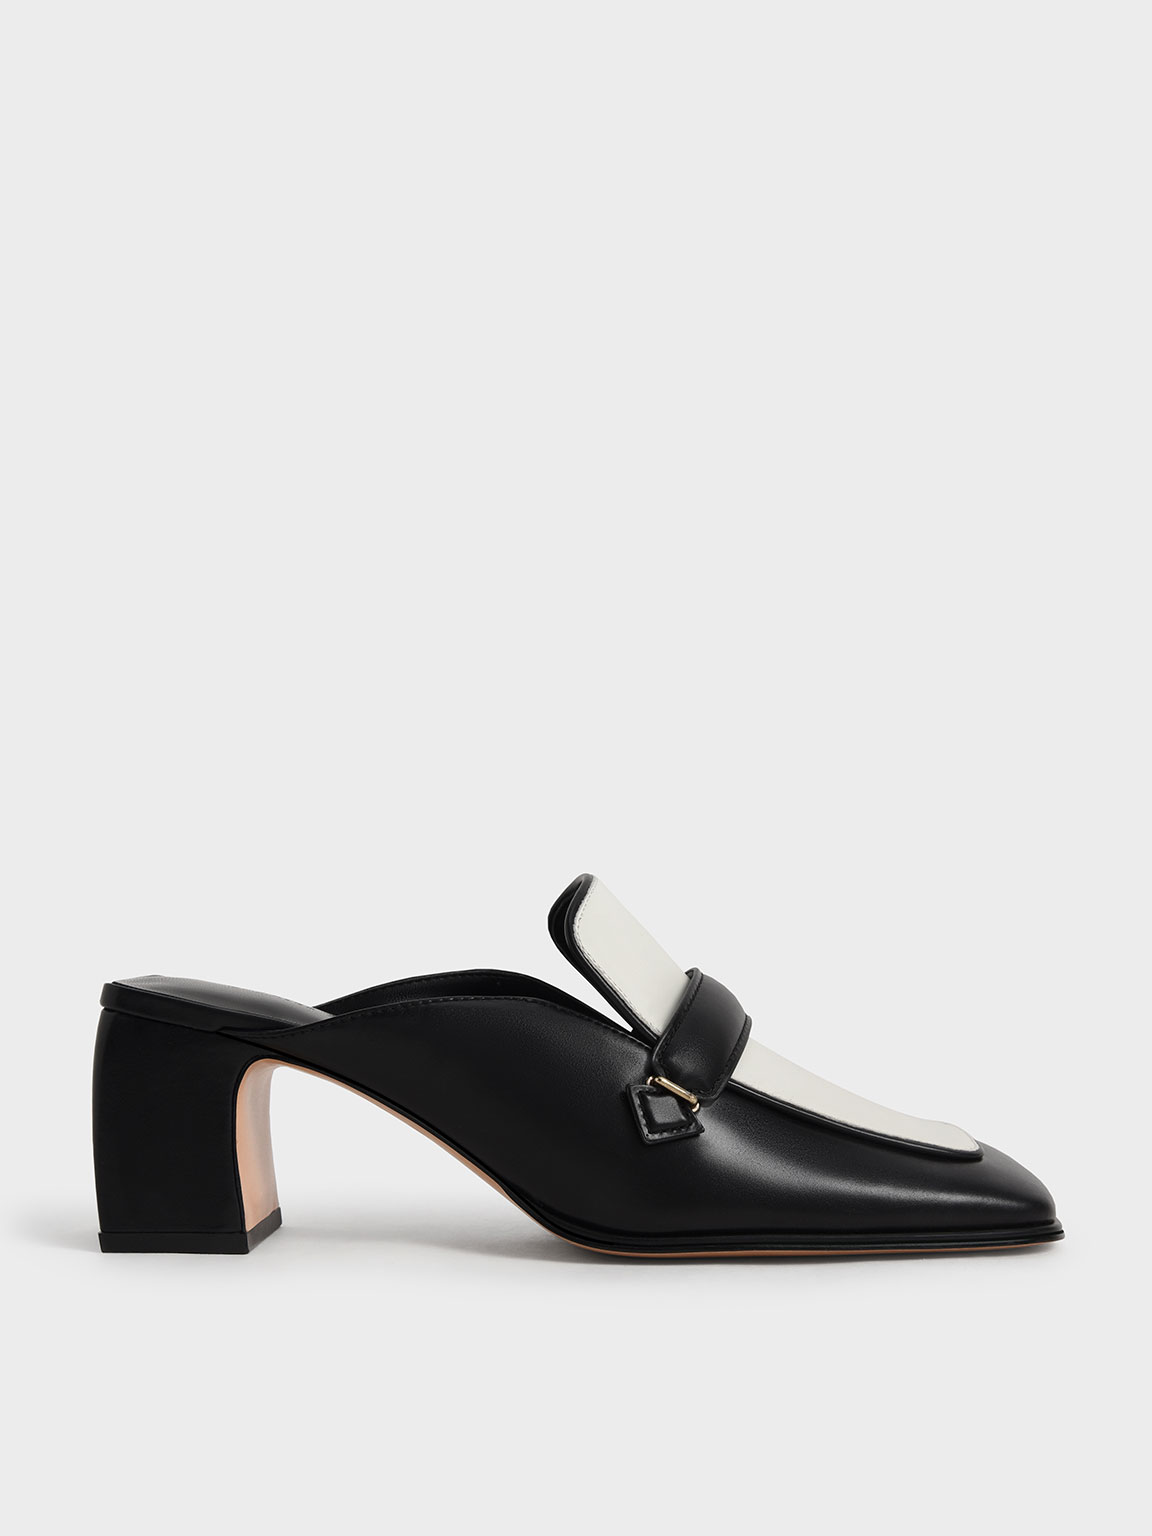 Black Two-Tone Block Heel Loafer Mules - CHARLES & KEITH SG